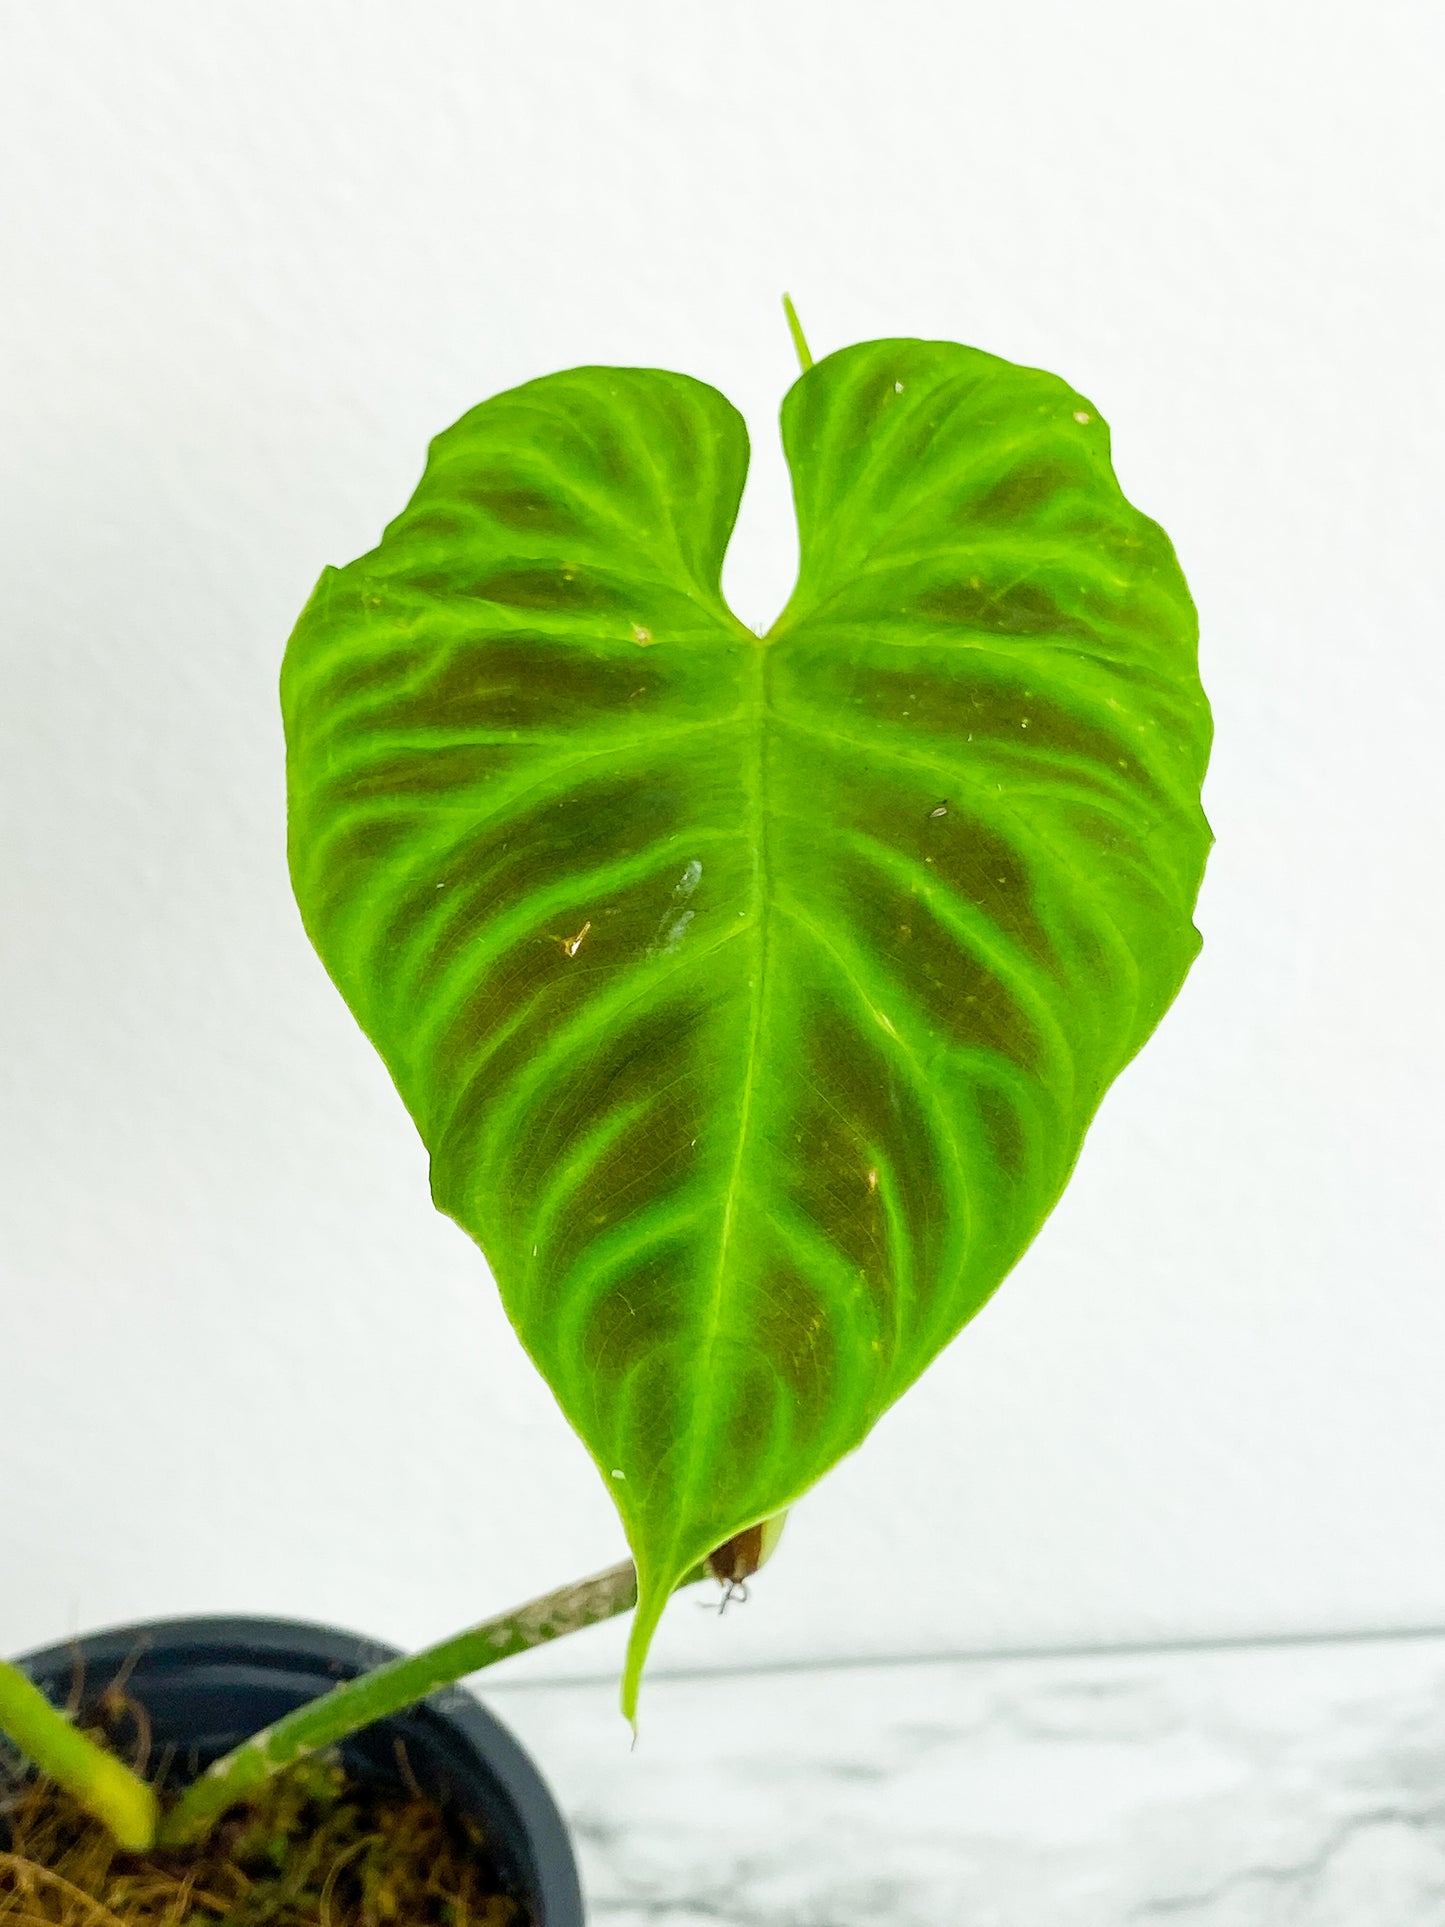 Philodendron verrucosum tambillo rooted 3 leaves (1 leaf is unfurling)